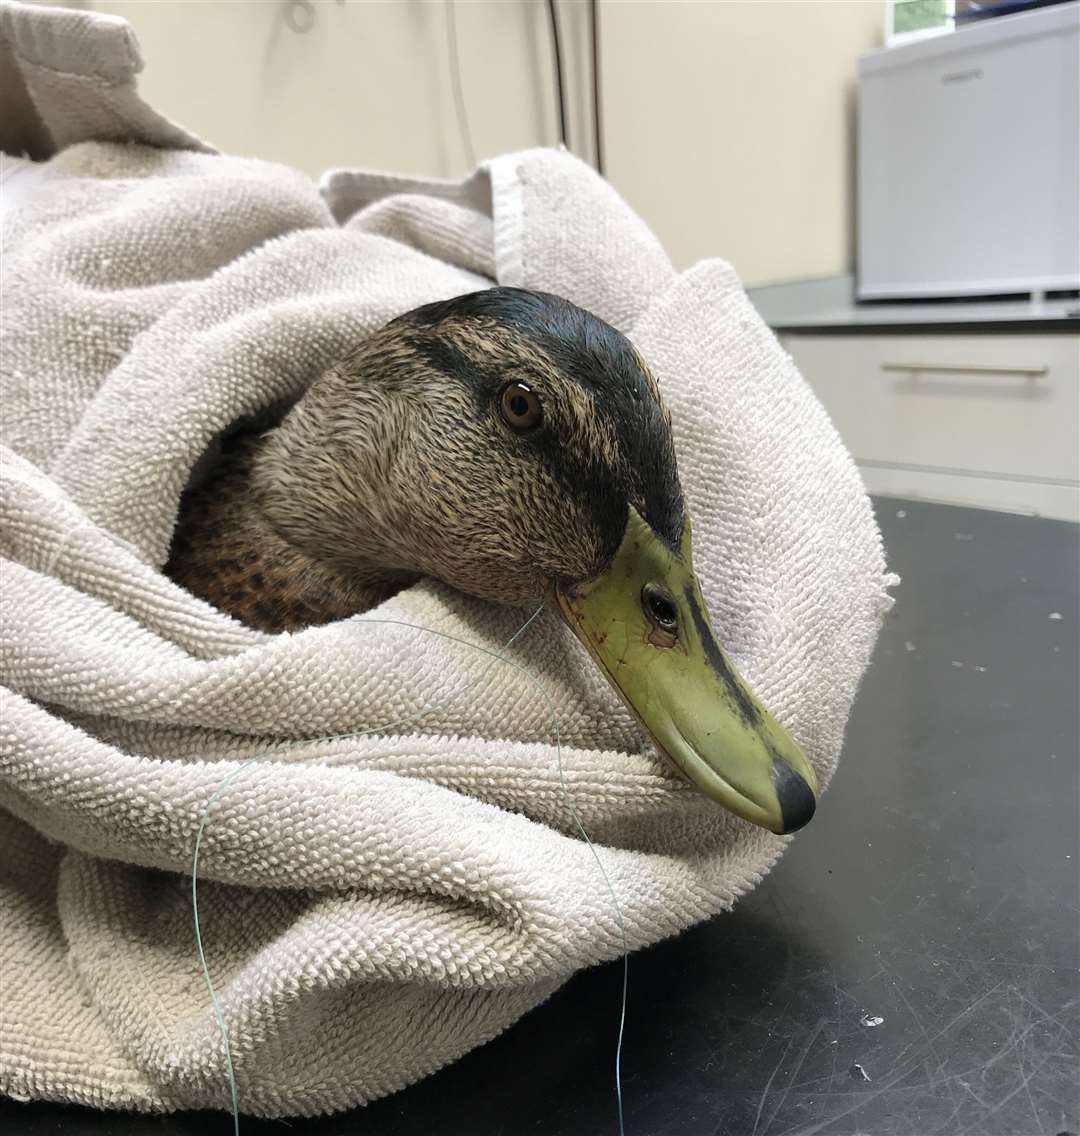 A duck with a hook in its mouth was rescued by the RSPCA